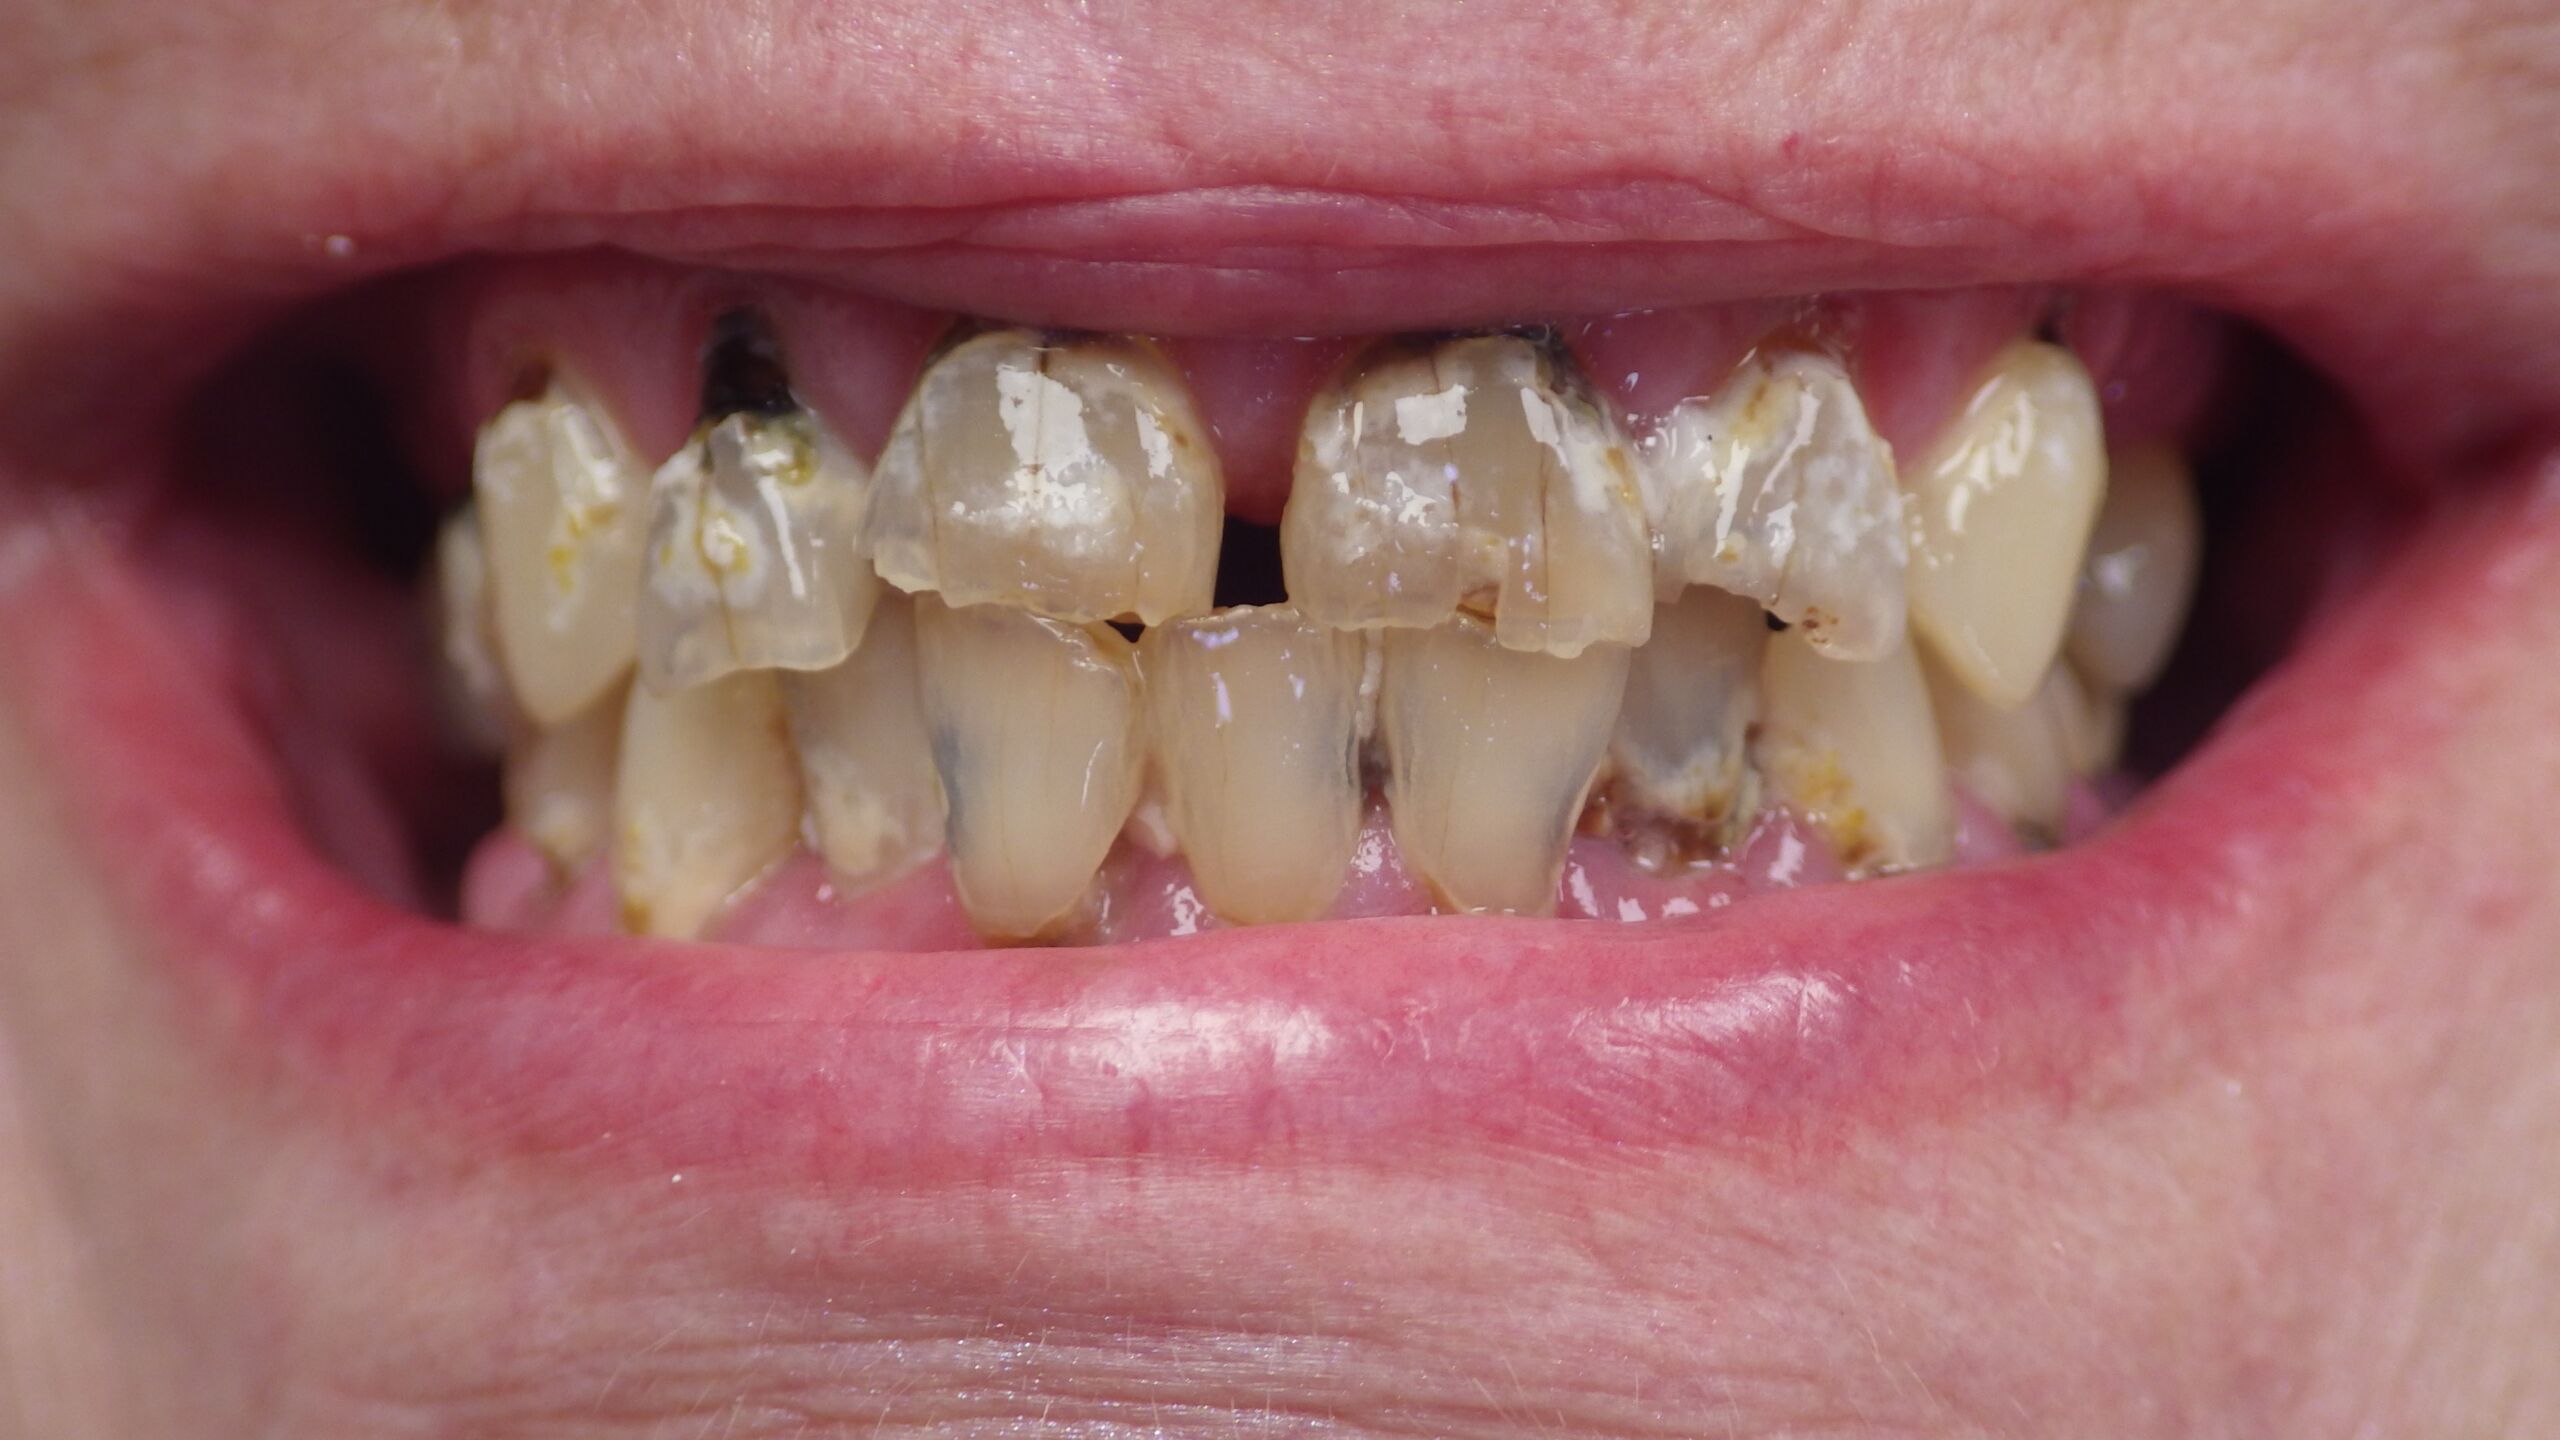 Tooth decay before dental services in Greensboro, NC